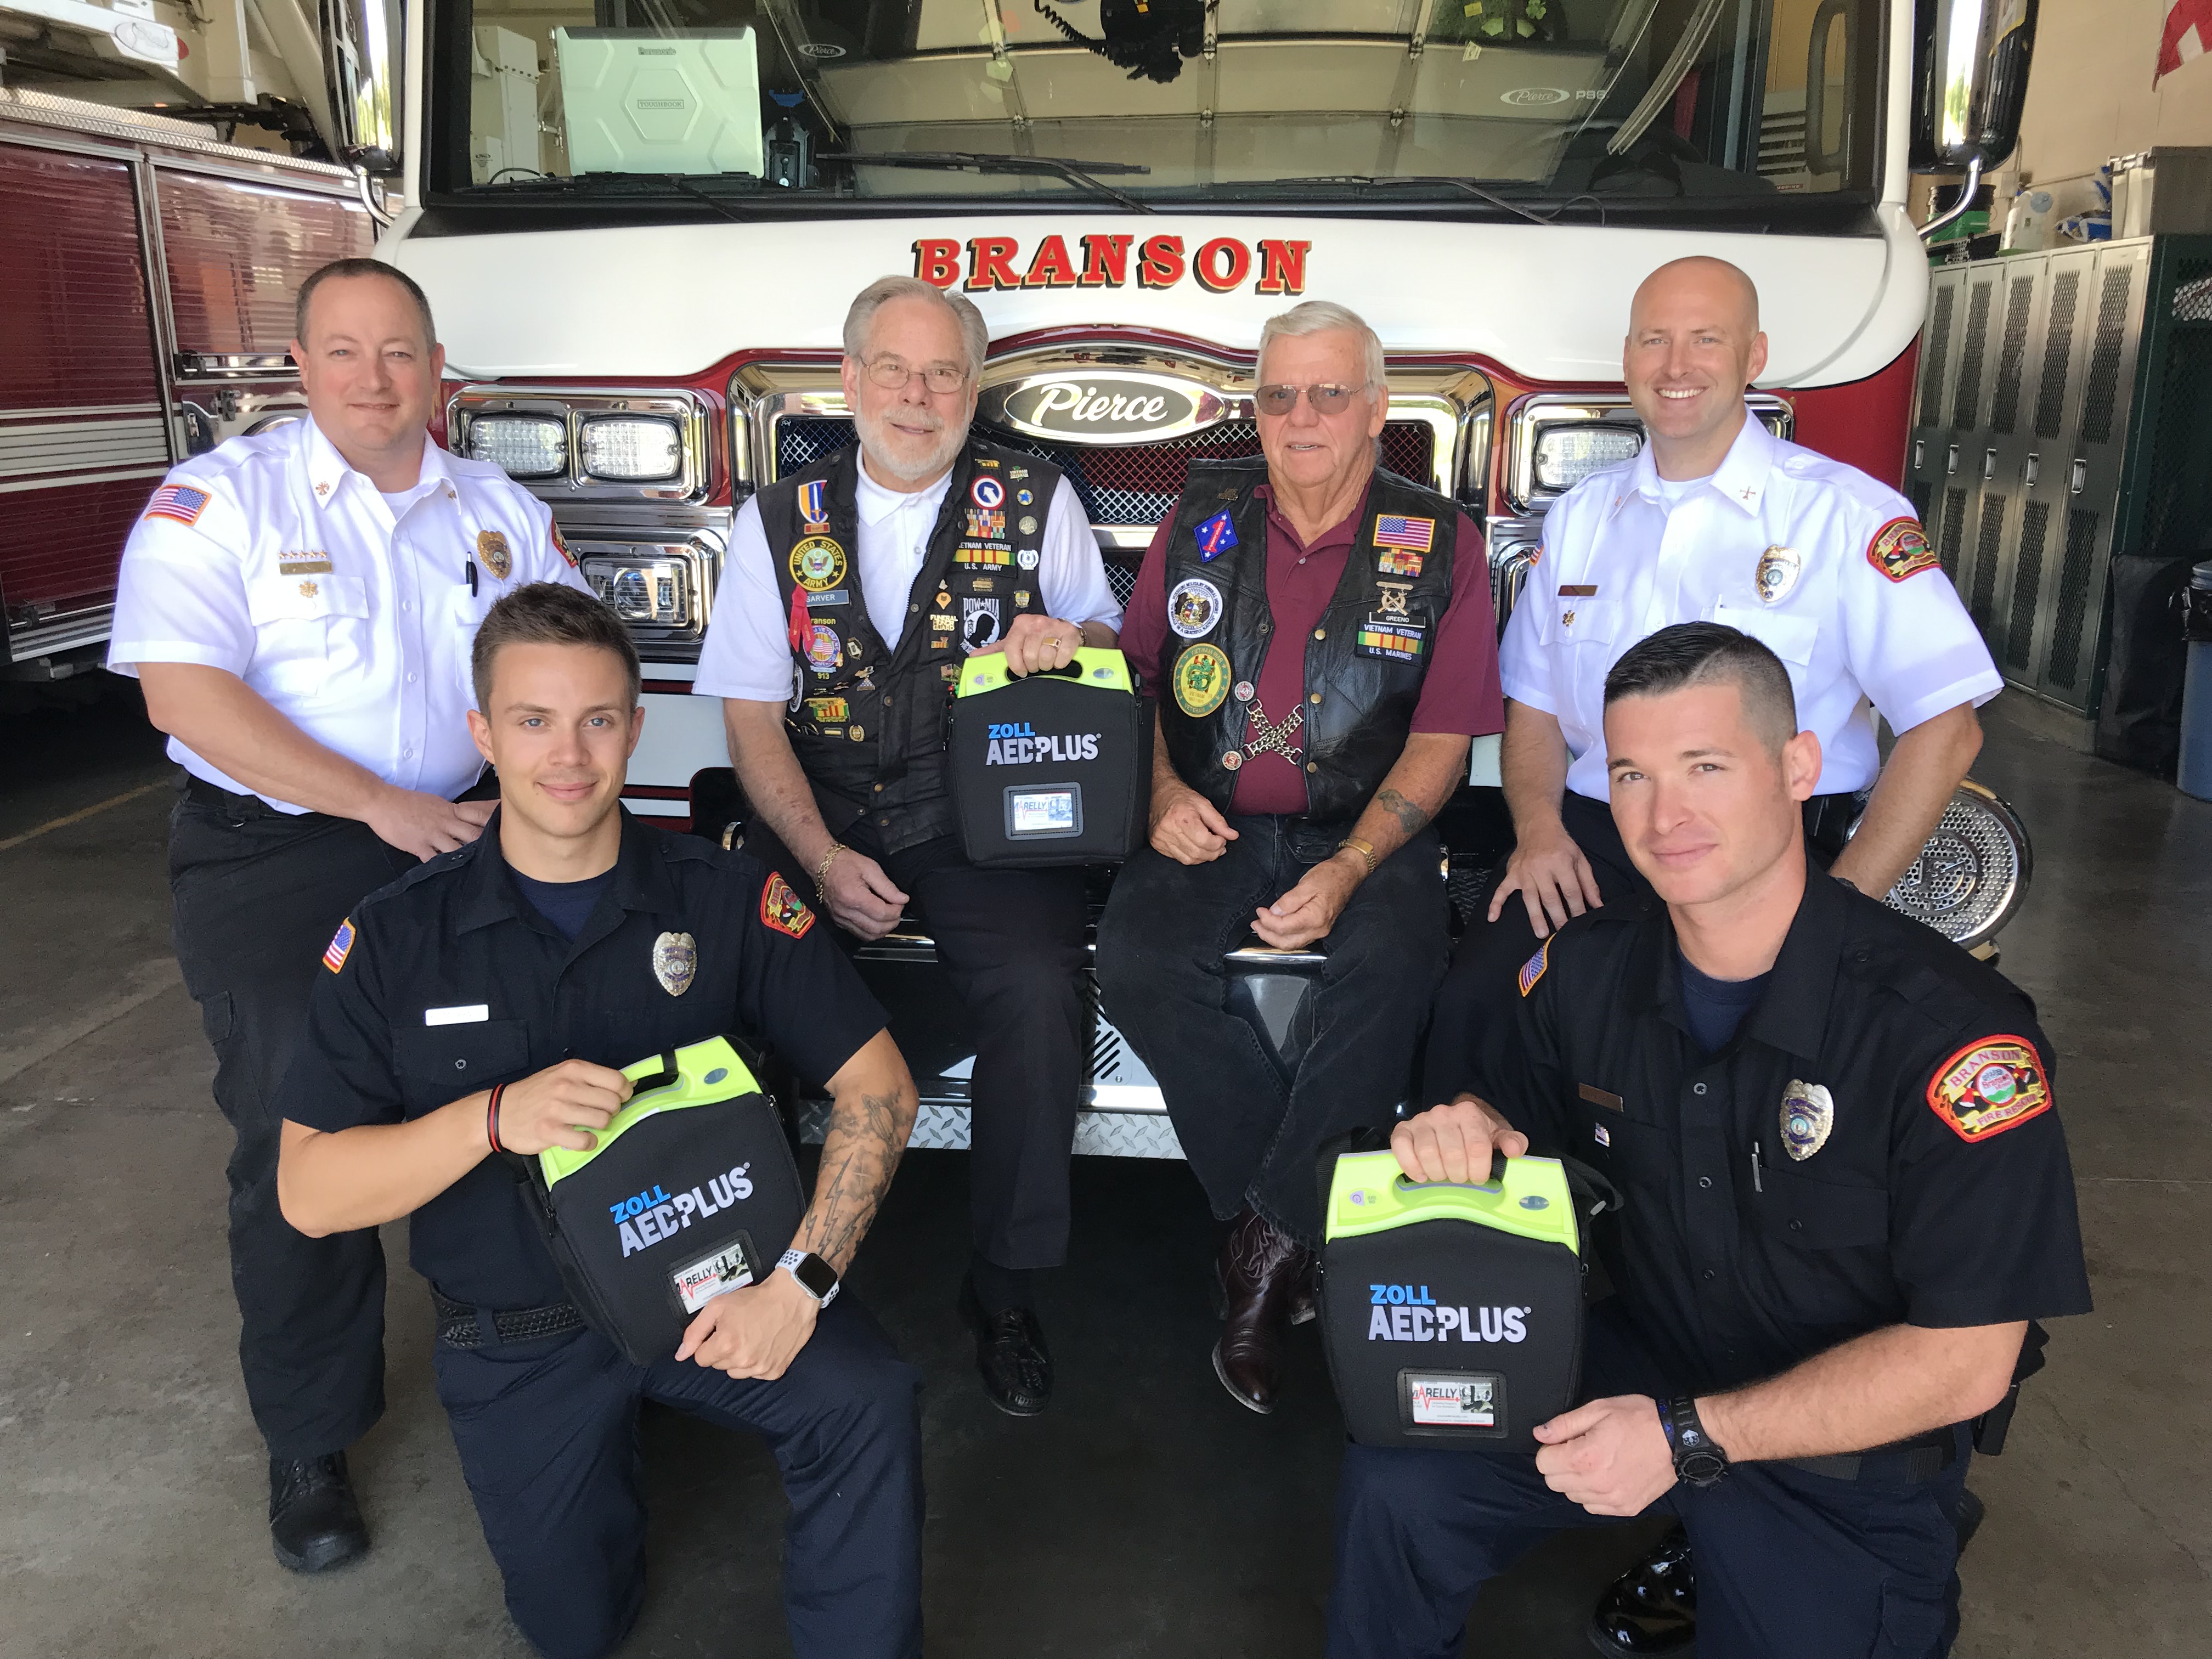 BFD AED Donation - Branson Fire Department Receives Donation for Automatic External Defibrillators